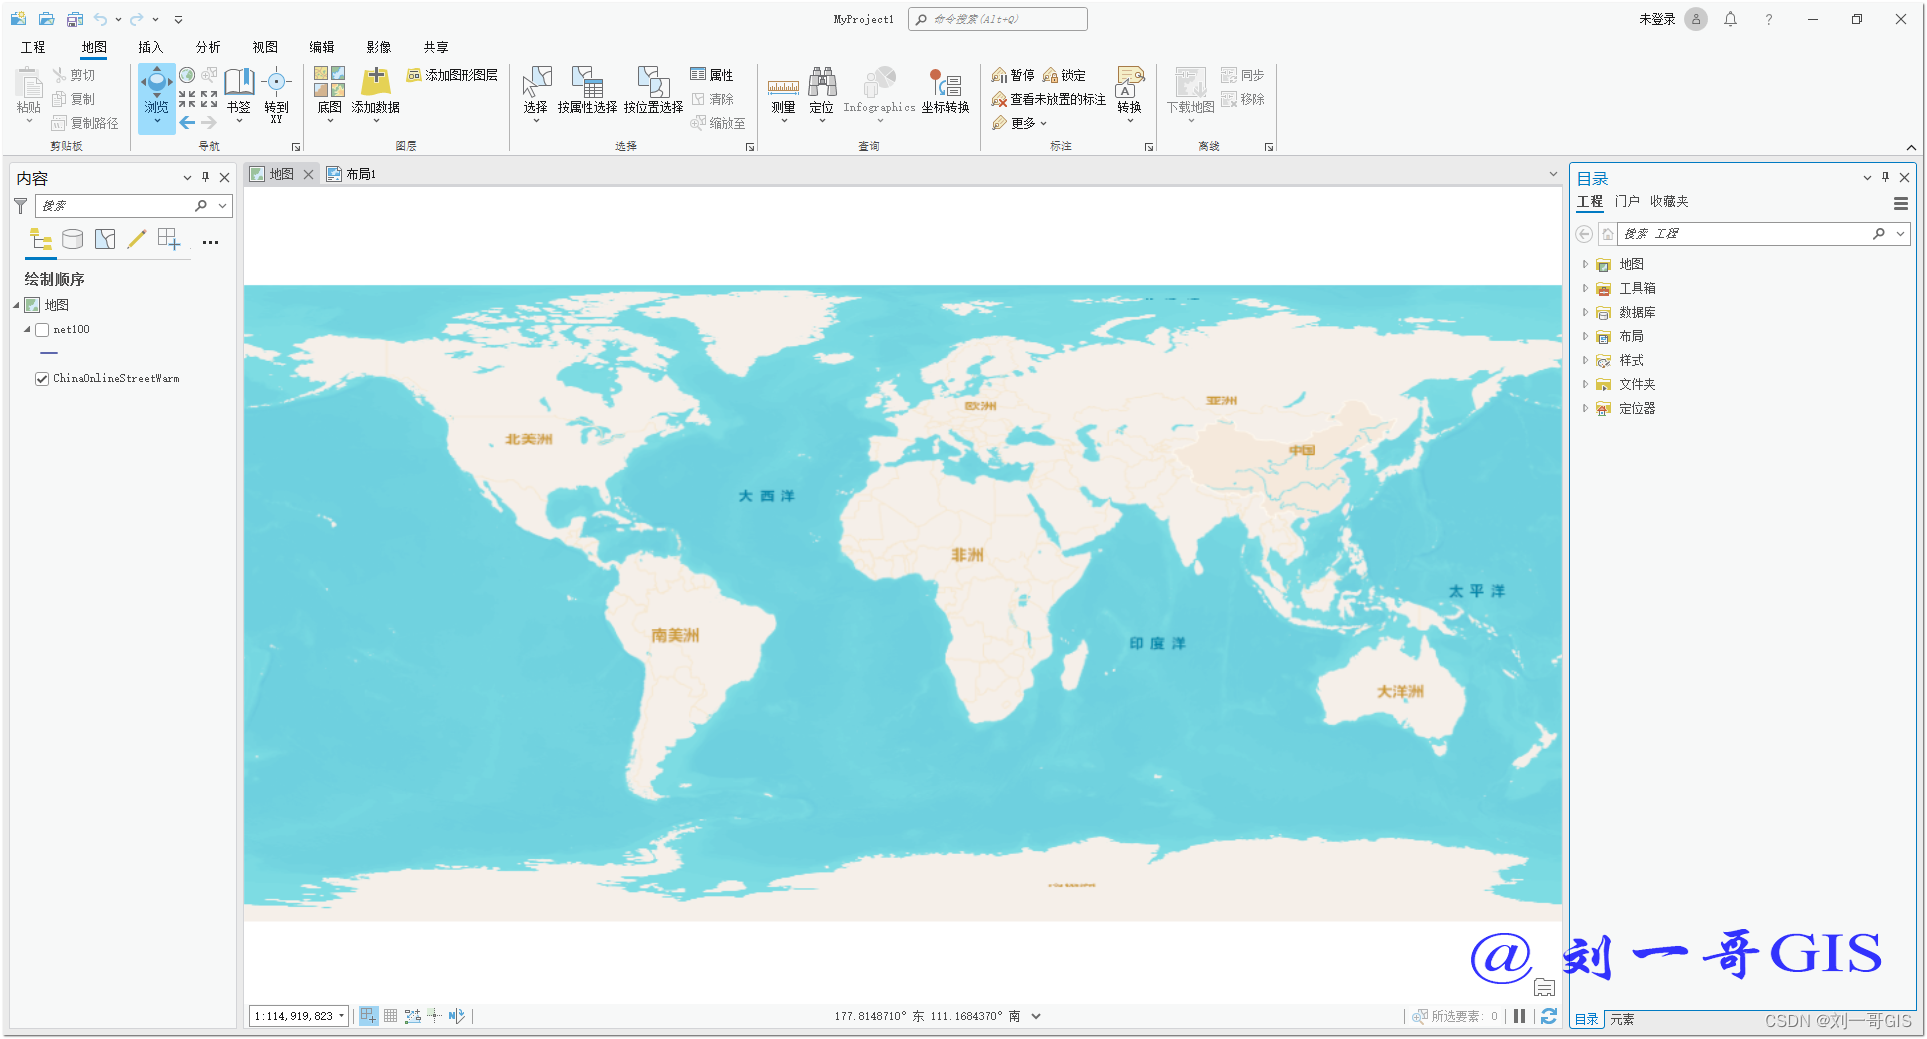 【ArcGIS Pro<span style='color:red;'>微</span><span style='color:red;'>课</span><span style='color:red;'>1000</span><span style='color:red;'>例</span>】<span style='color:red;'>0039</span>：制作全球任意经纬网<span style='color:red;'>的</span>两种方式